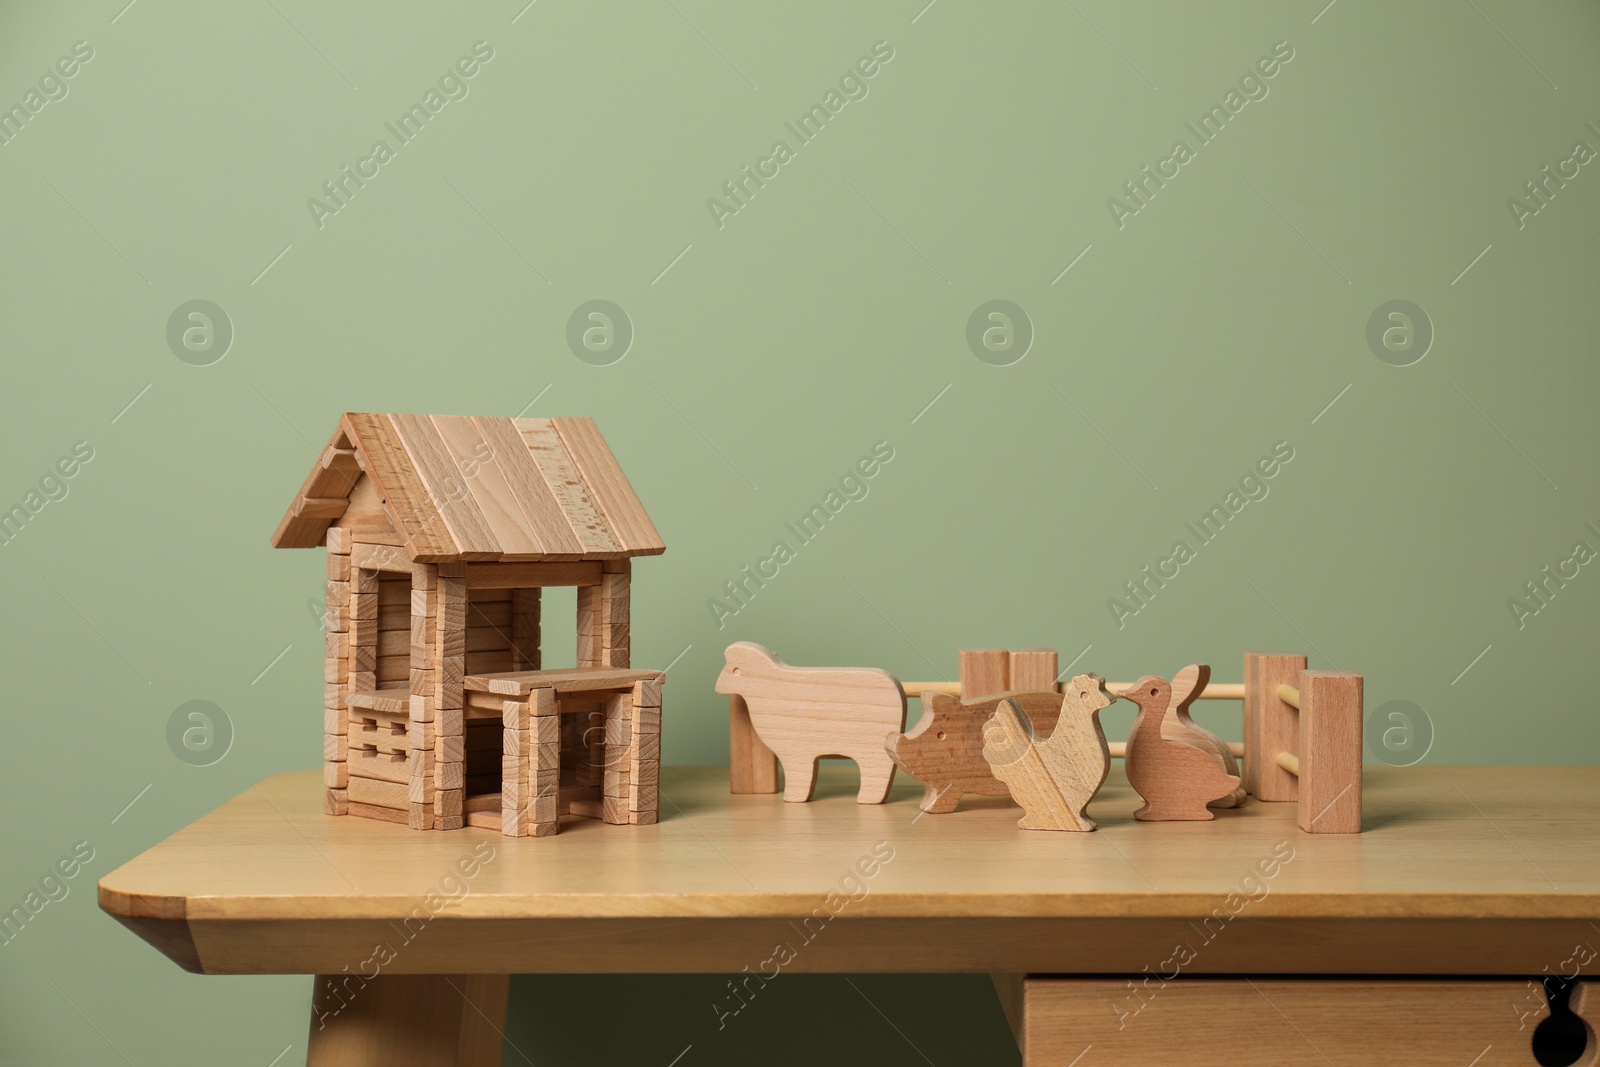 Photo of Wooden house, animals and fence on table near olive wall, space for text. Children's toys